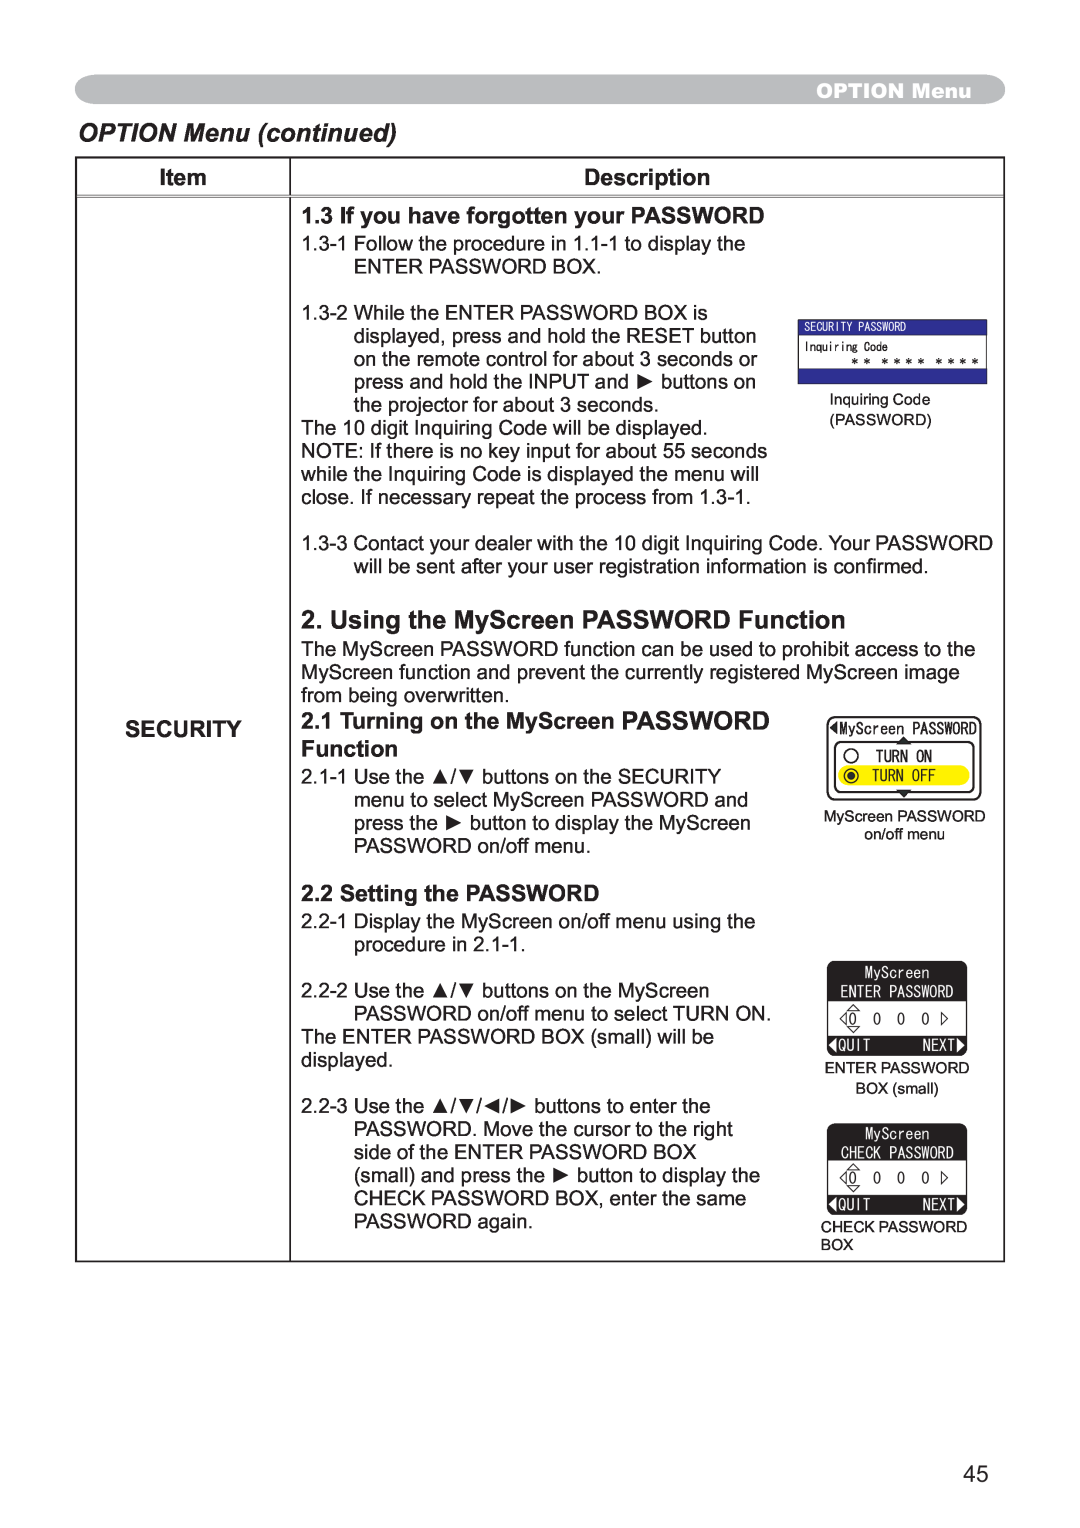 Hitachi CP-X251 Using the MyScreen PASSWORD Function, OPTION Menu continued, Description, Security, Setting the PASSWORD 